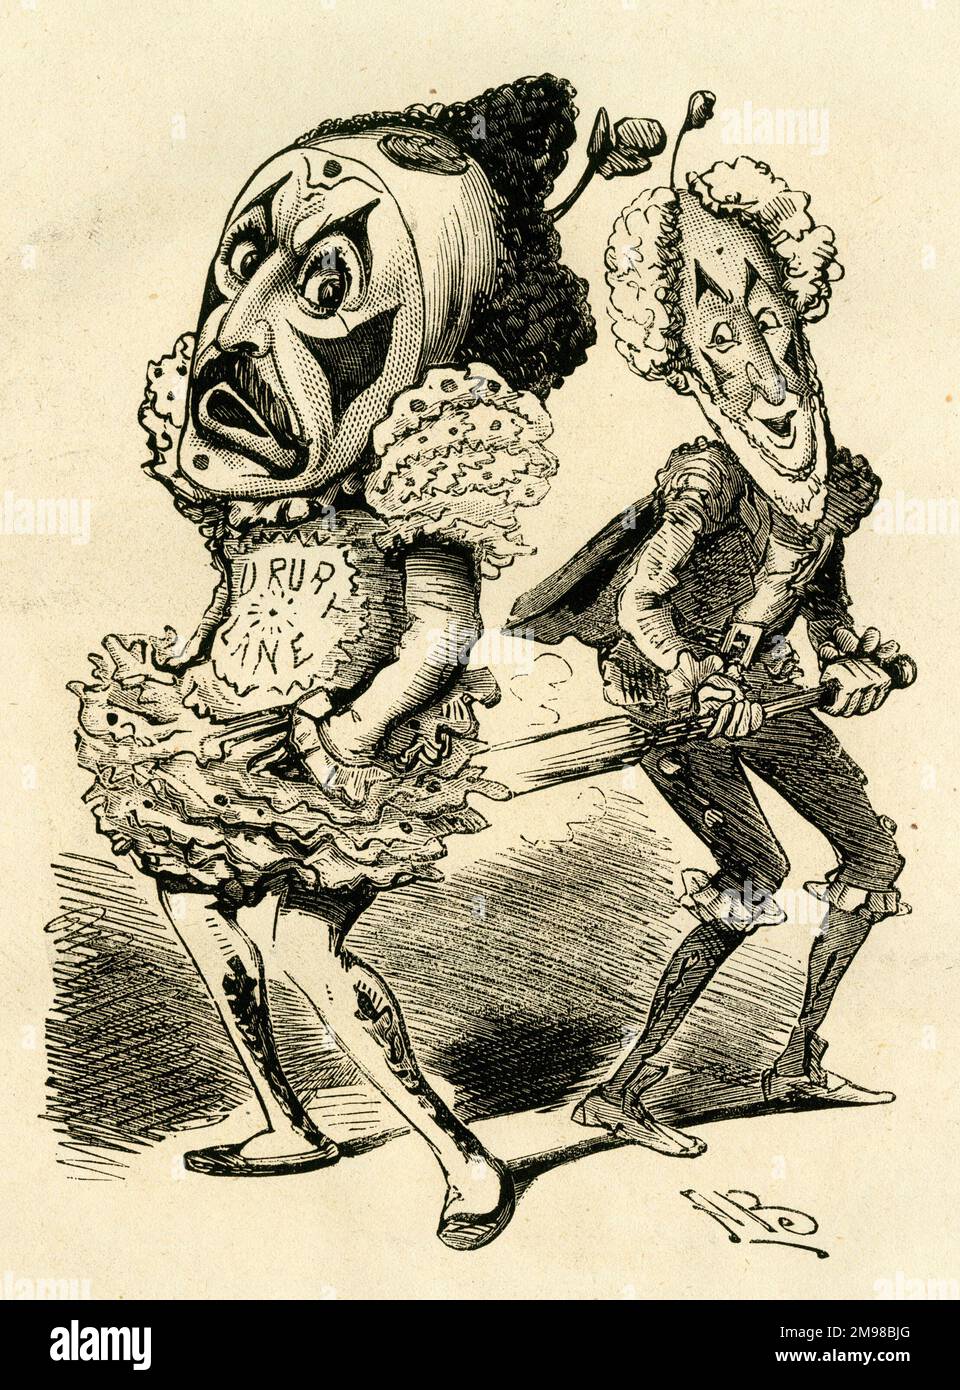 Cartoon, Freddy Leader (right) thinks he will touch up Gussy Harris (left) this Christmas -- a reference to the Drury Lane pantomime season. Frederick C Leader was lessee and manager of Her Majesty's Theatre, London. Augustus Harris (1852-1896) was a British actor, dramatist and impresario. Stock Photo